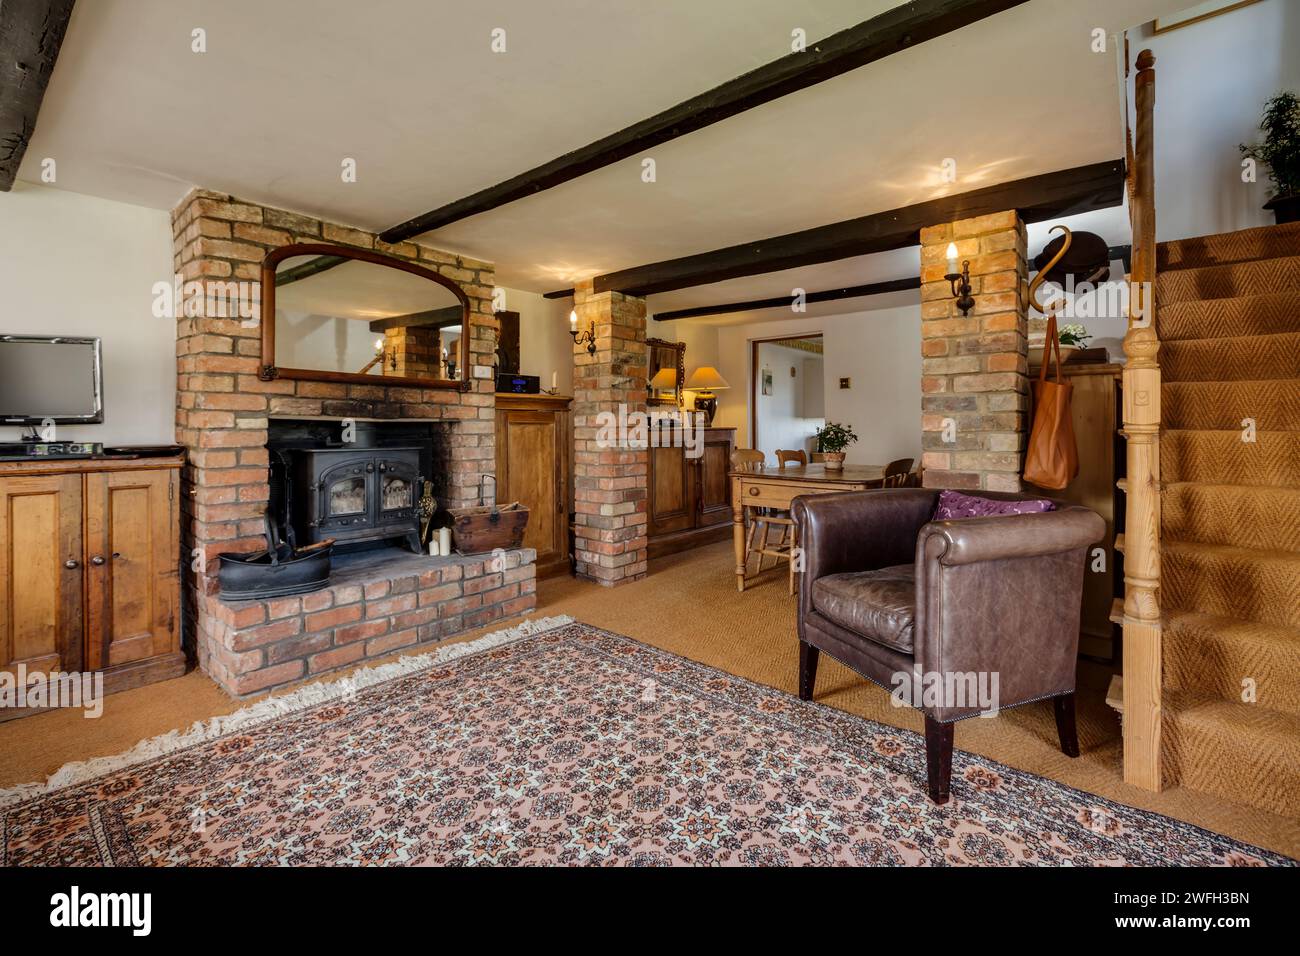 Boxworth, England - March 17 2016: Traditional furnished cottage living room with feature fireplace and woodburning stove Stock Photo